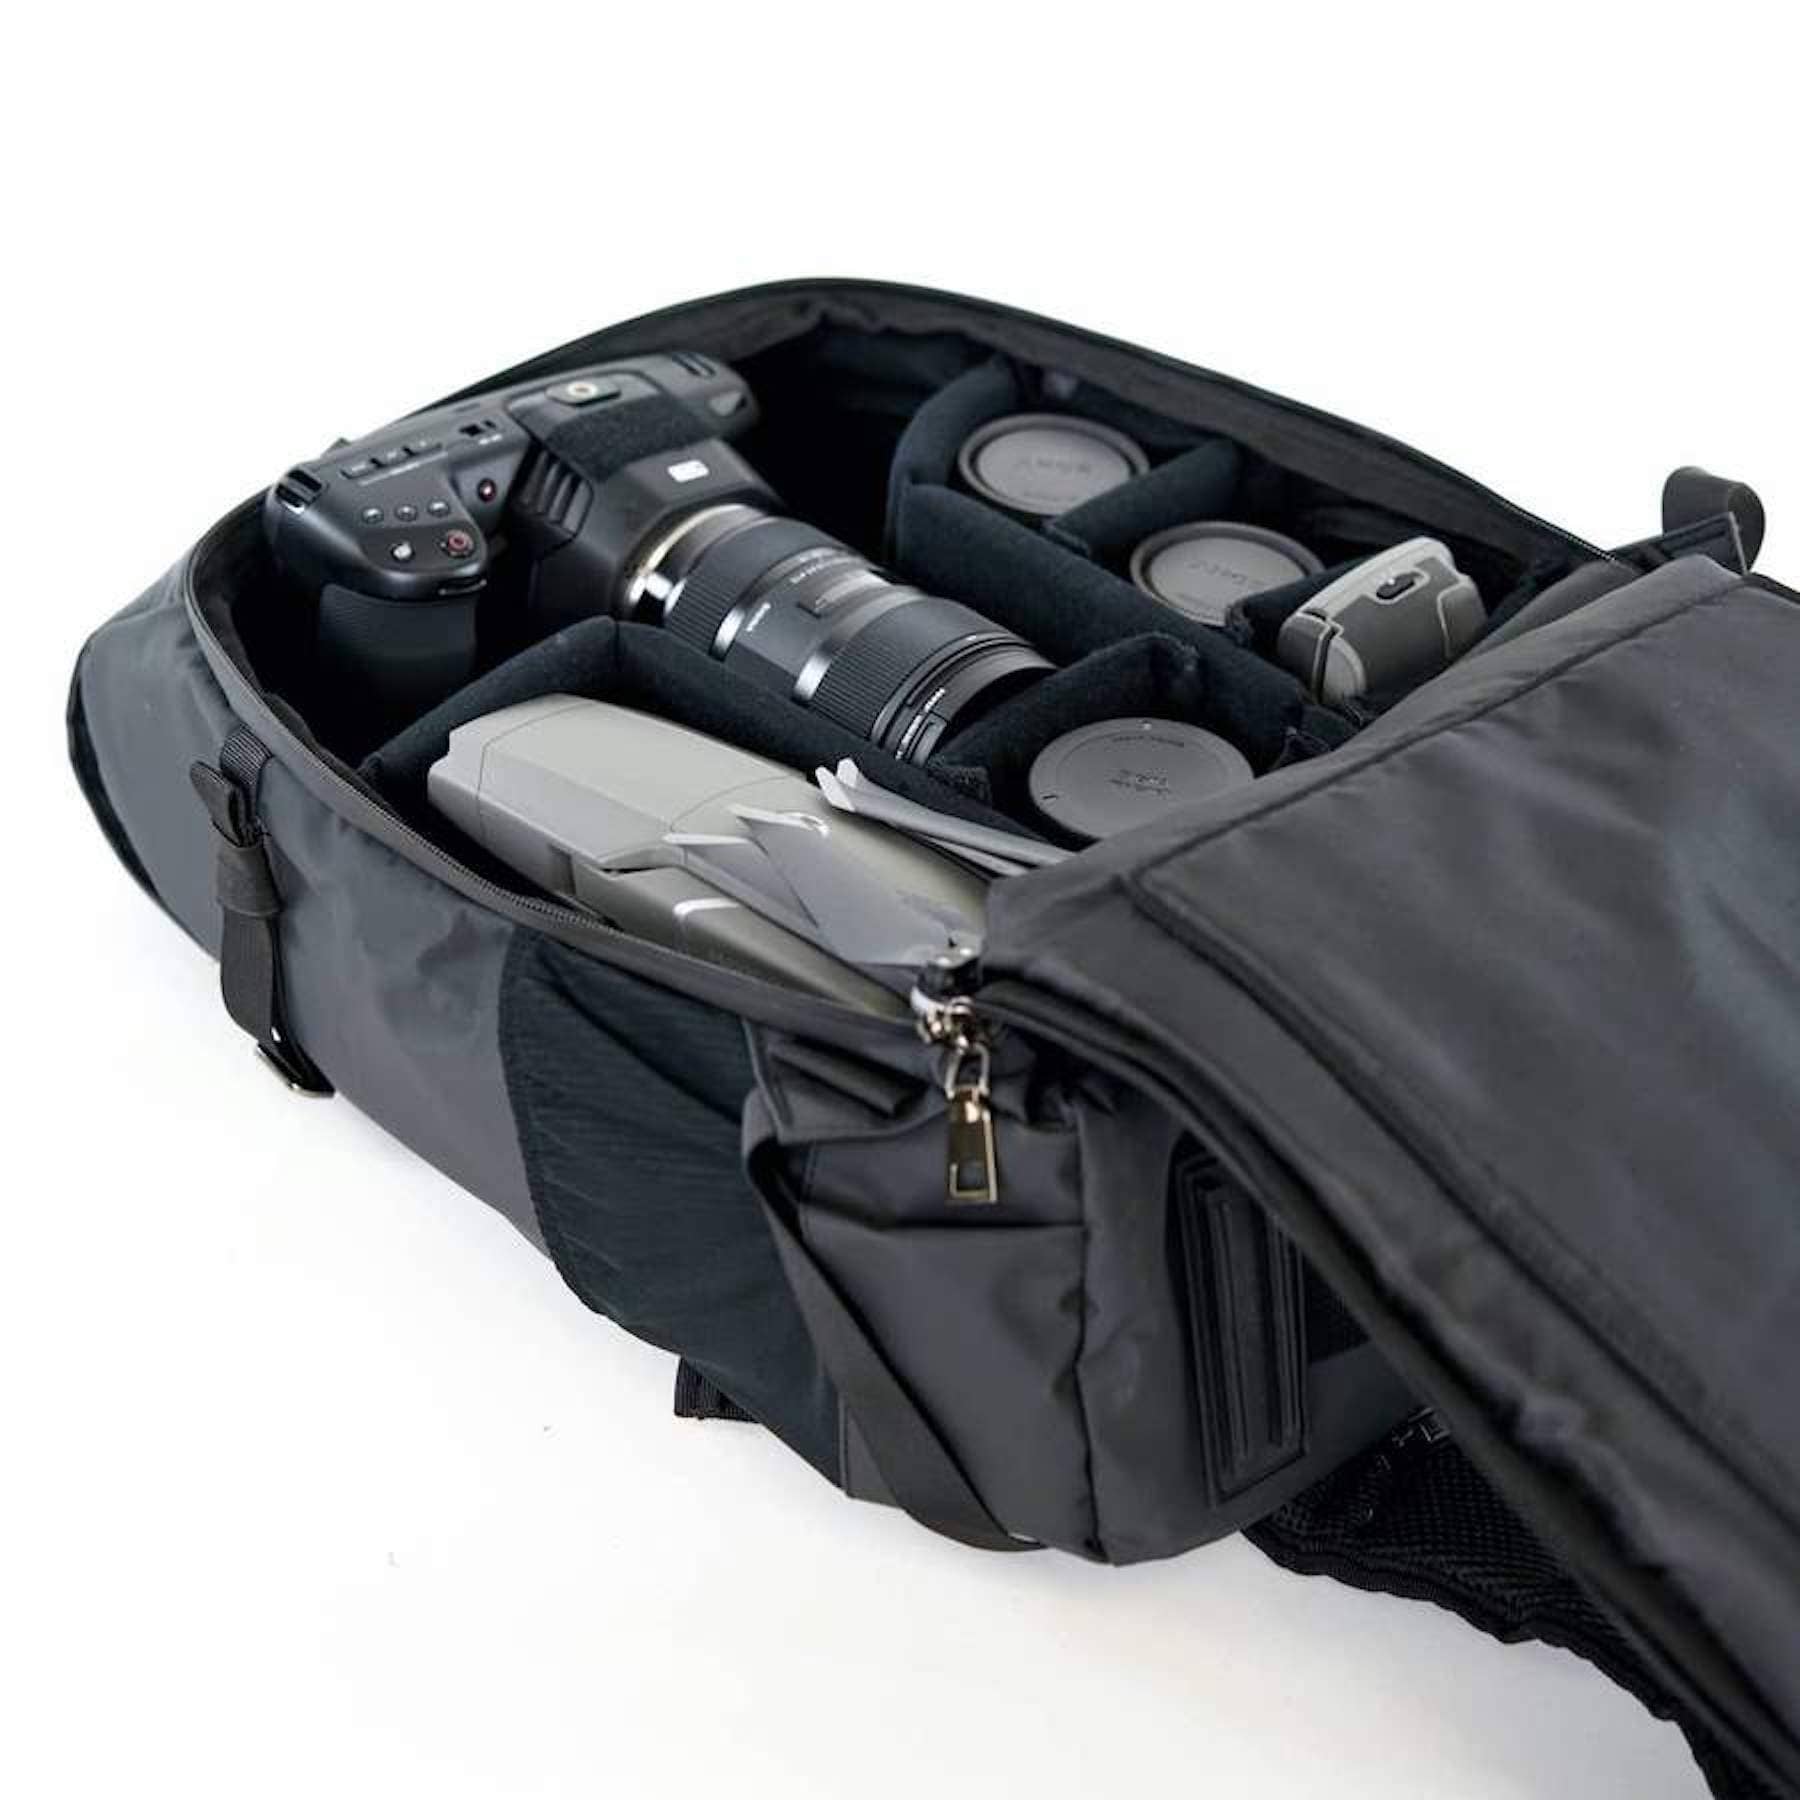 Best Sports Camera - Best Camera for Sports Photography - Camera Backpack Gear